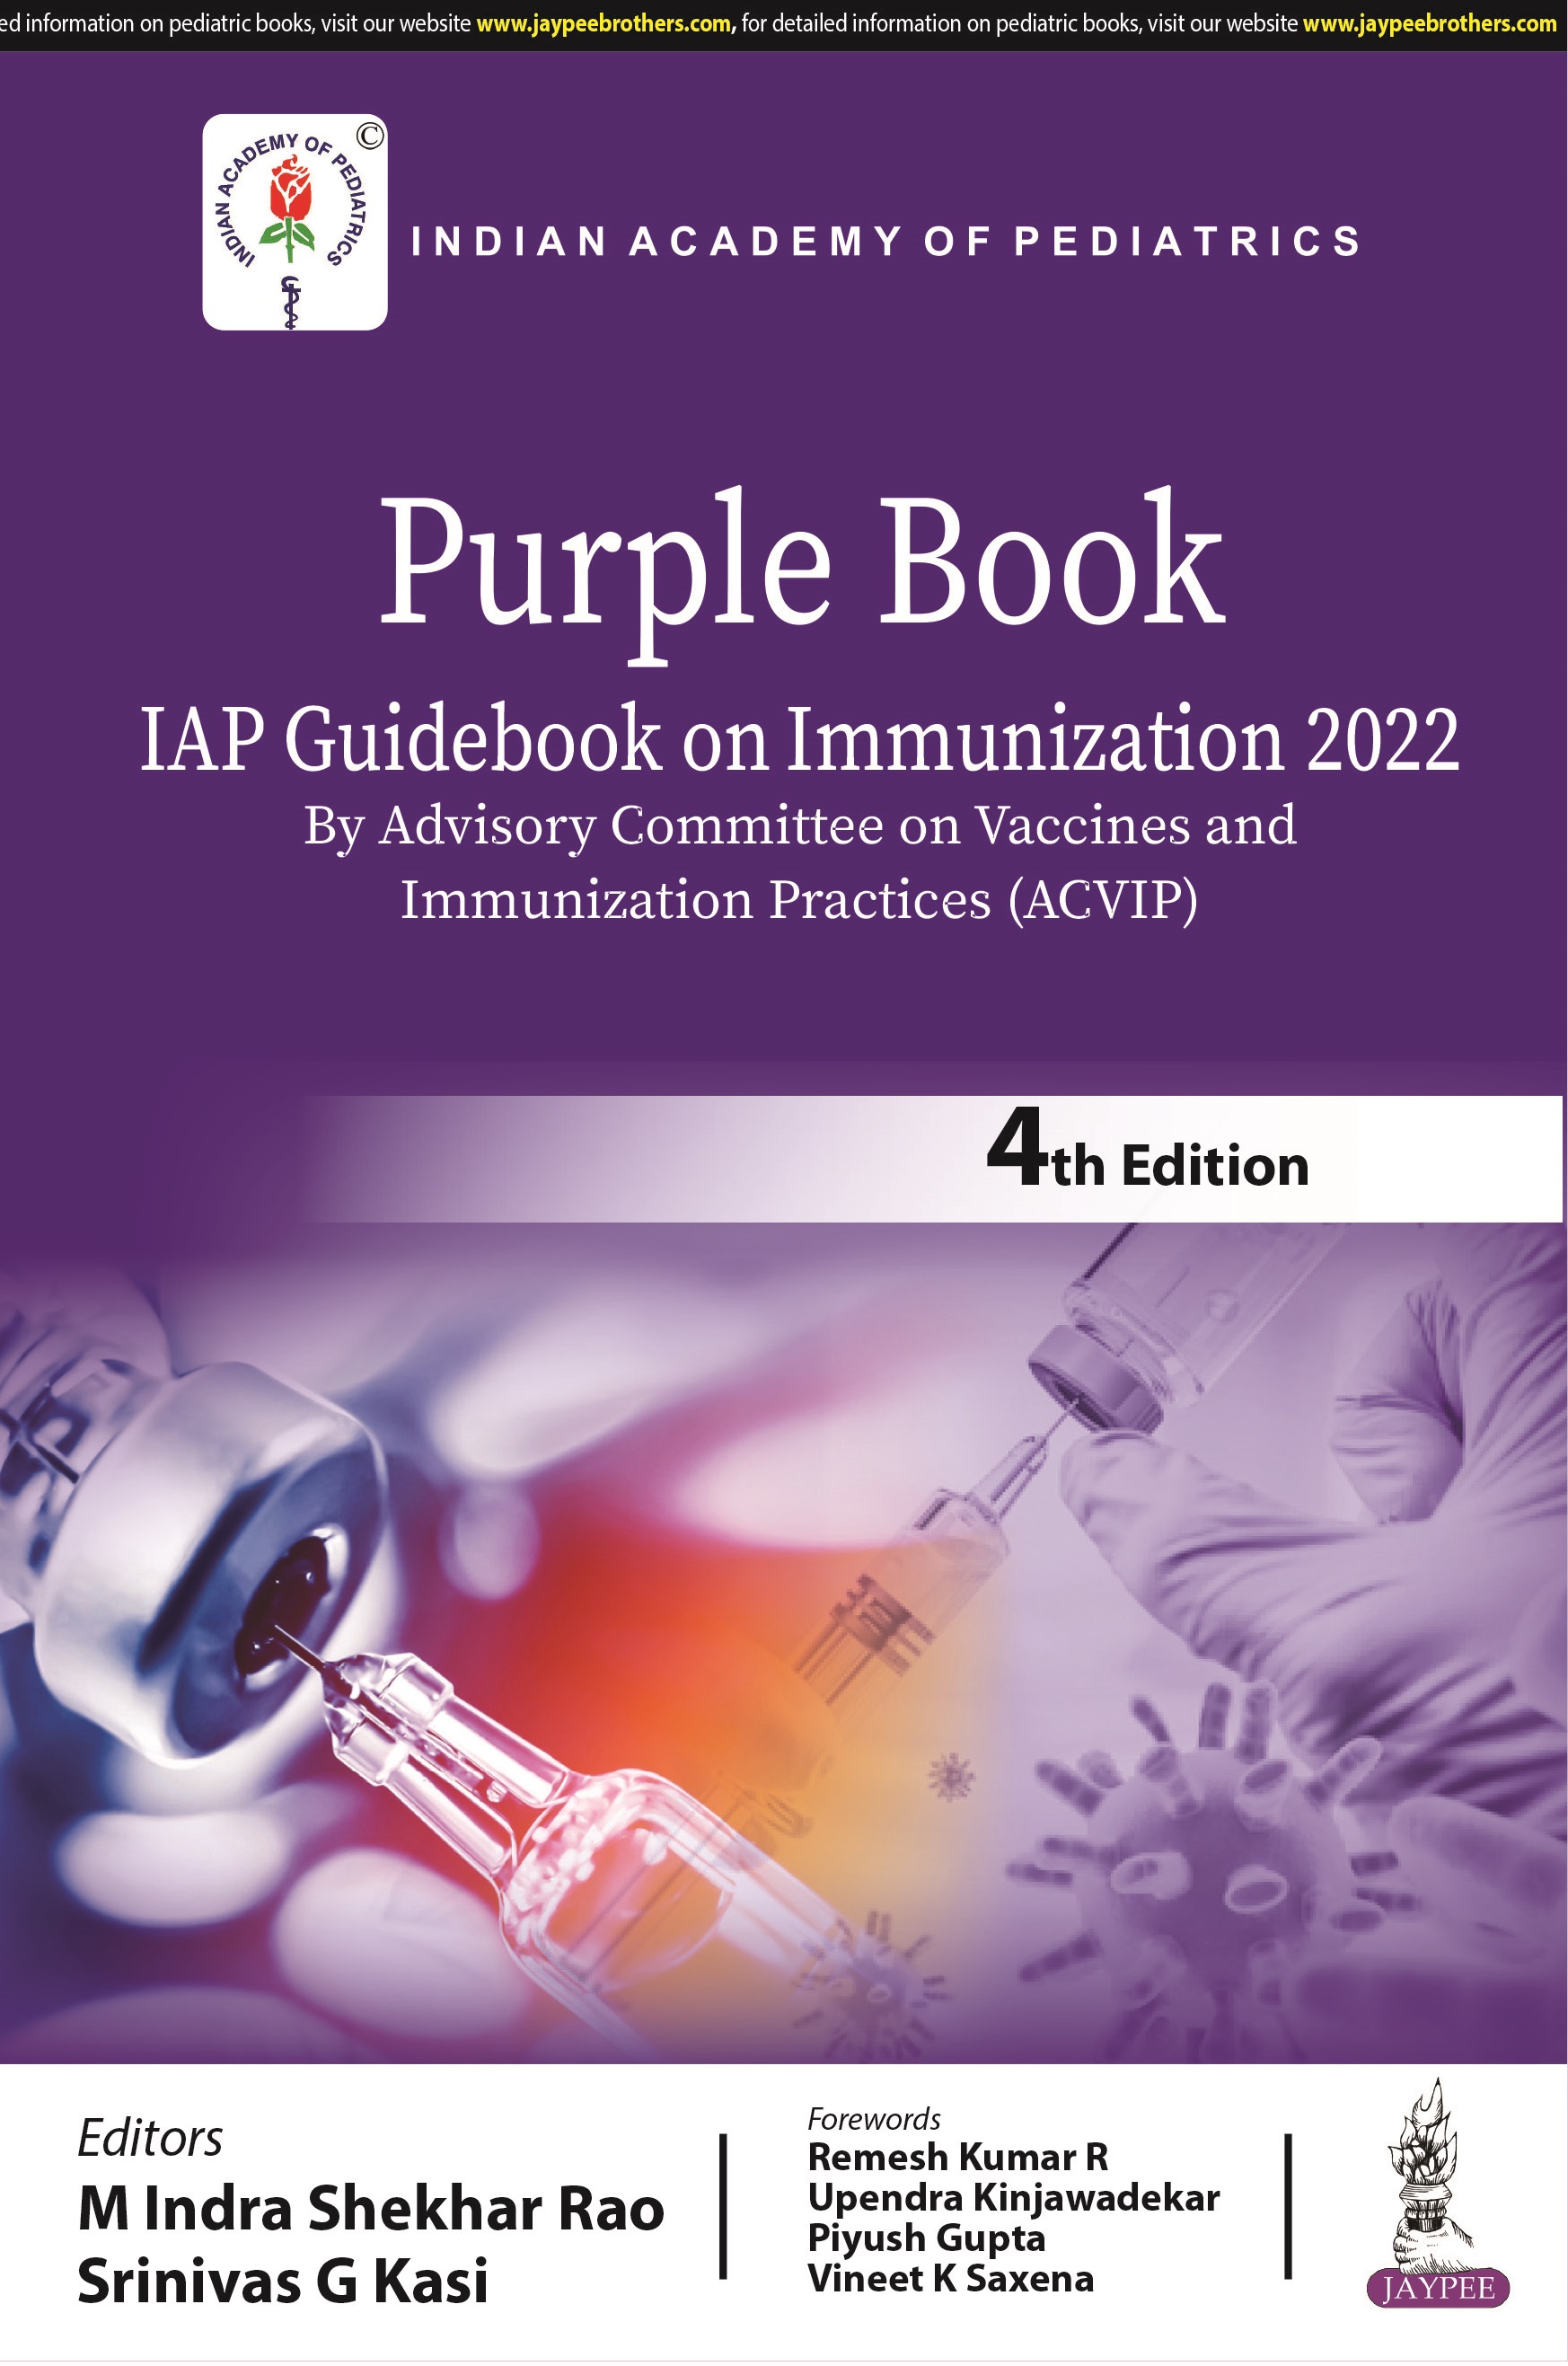 Purple Book: IAP Guidebook on Immunization 2022 (By Advisory Committee on Vaccines and Immunization Practices (ACVIP)